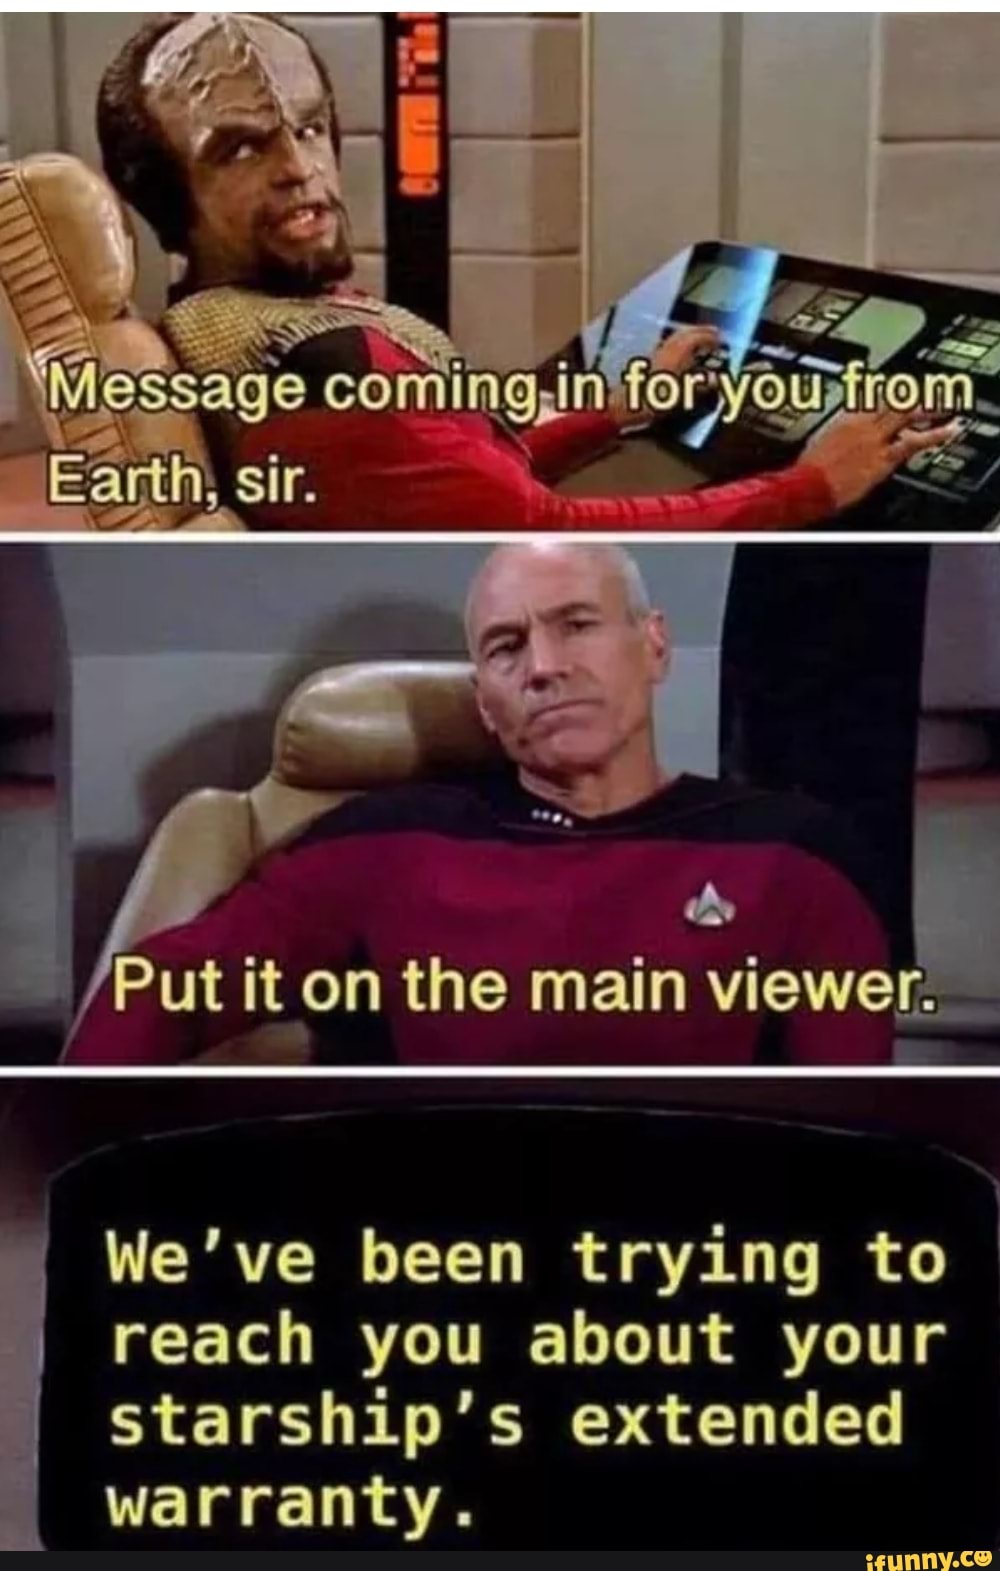 star trek memes - Message coming in for you from Earth, sir. Put it on the main viewer. We've been trying to reach you about your starship's extended warranty. ifunny.co